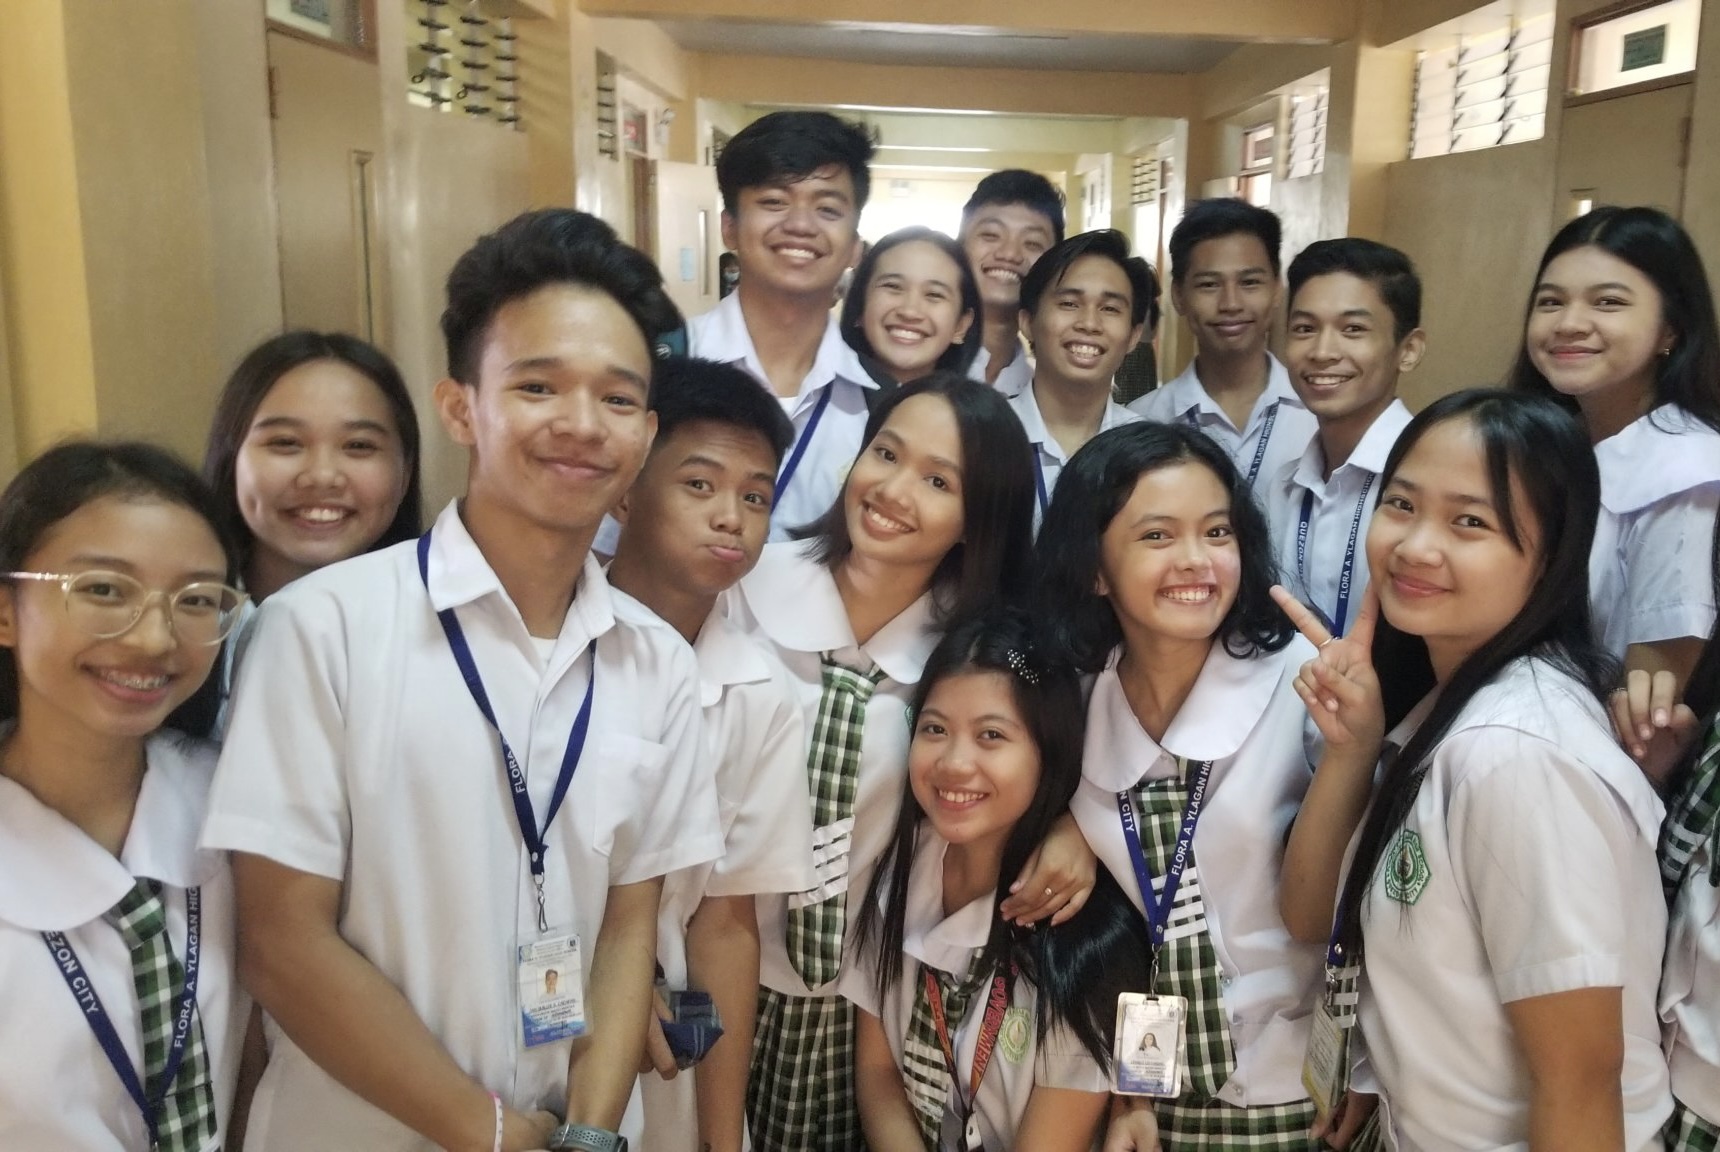 Students in the Philippines smile after learning about human rights